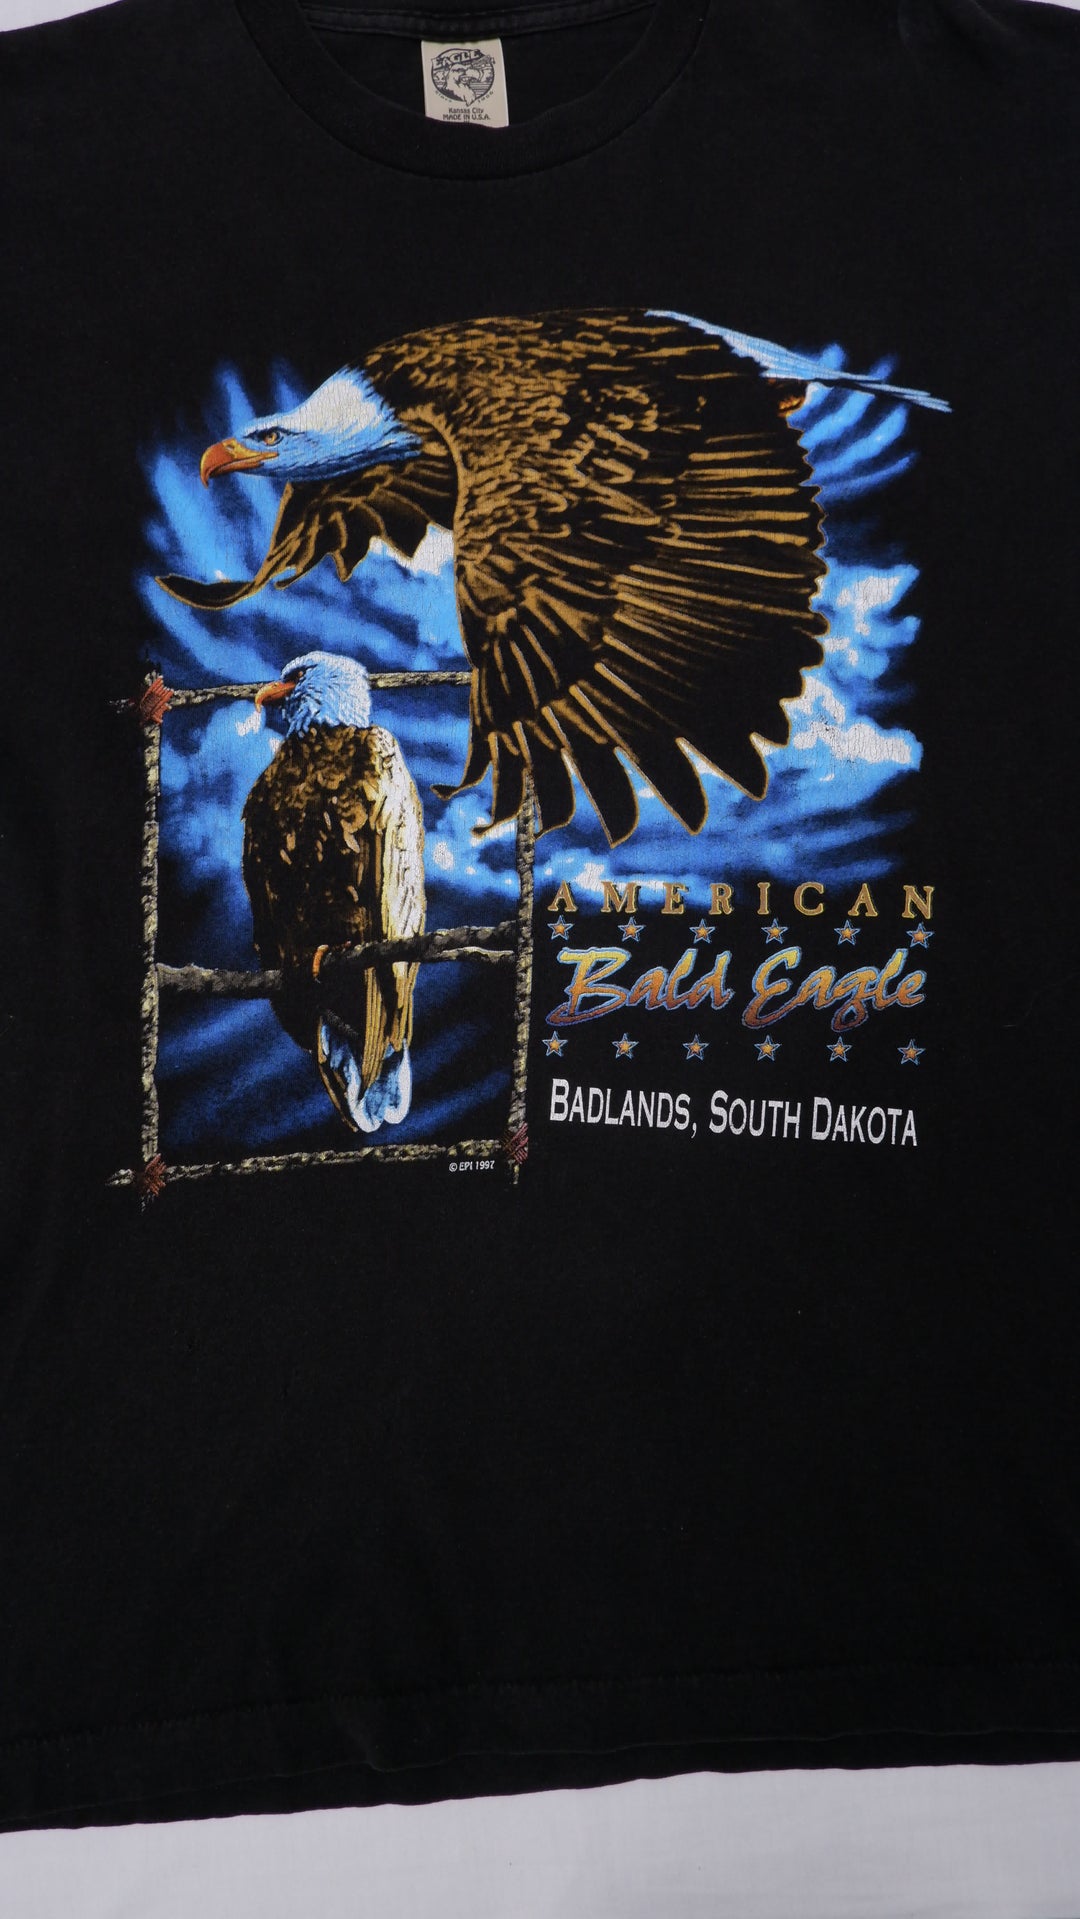 Vintage 1997 American Bald Eagle T-Shirt Single Stitch Made in USA